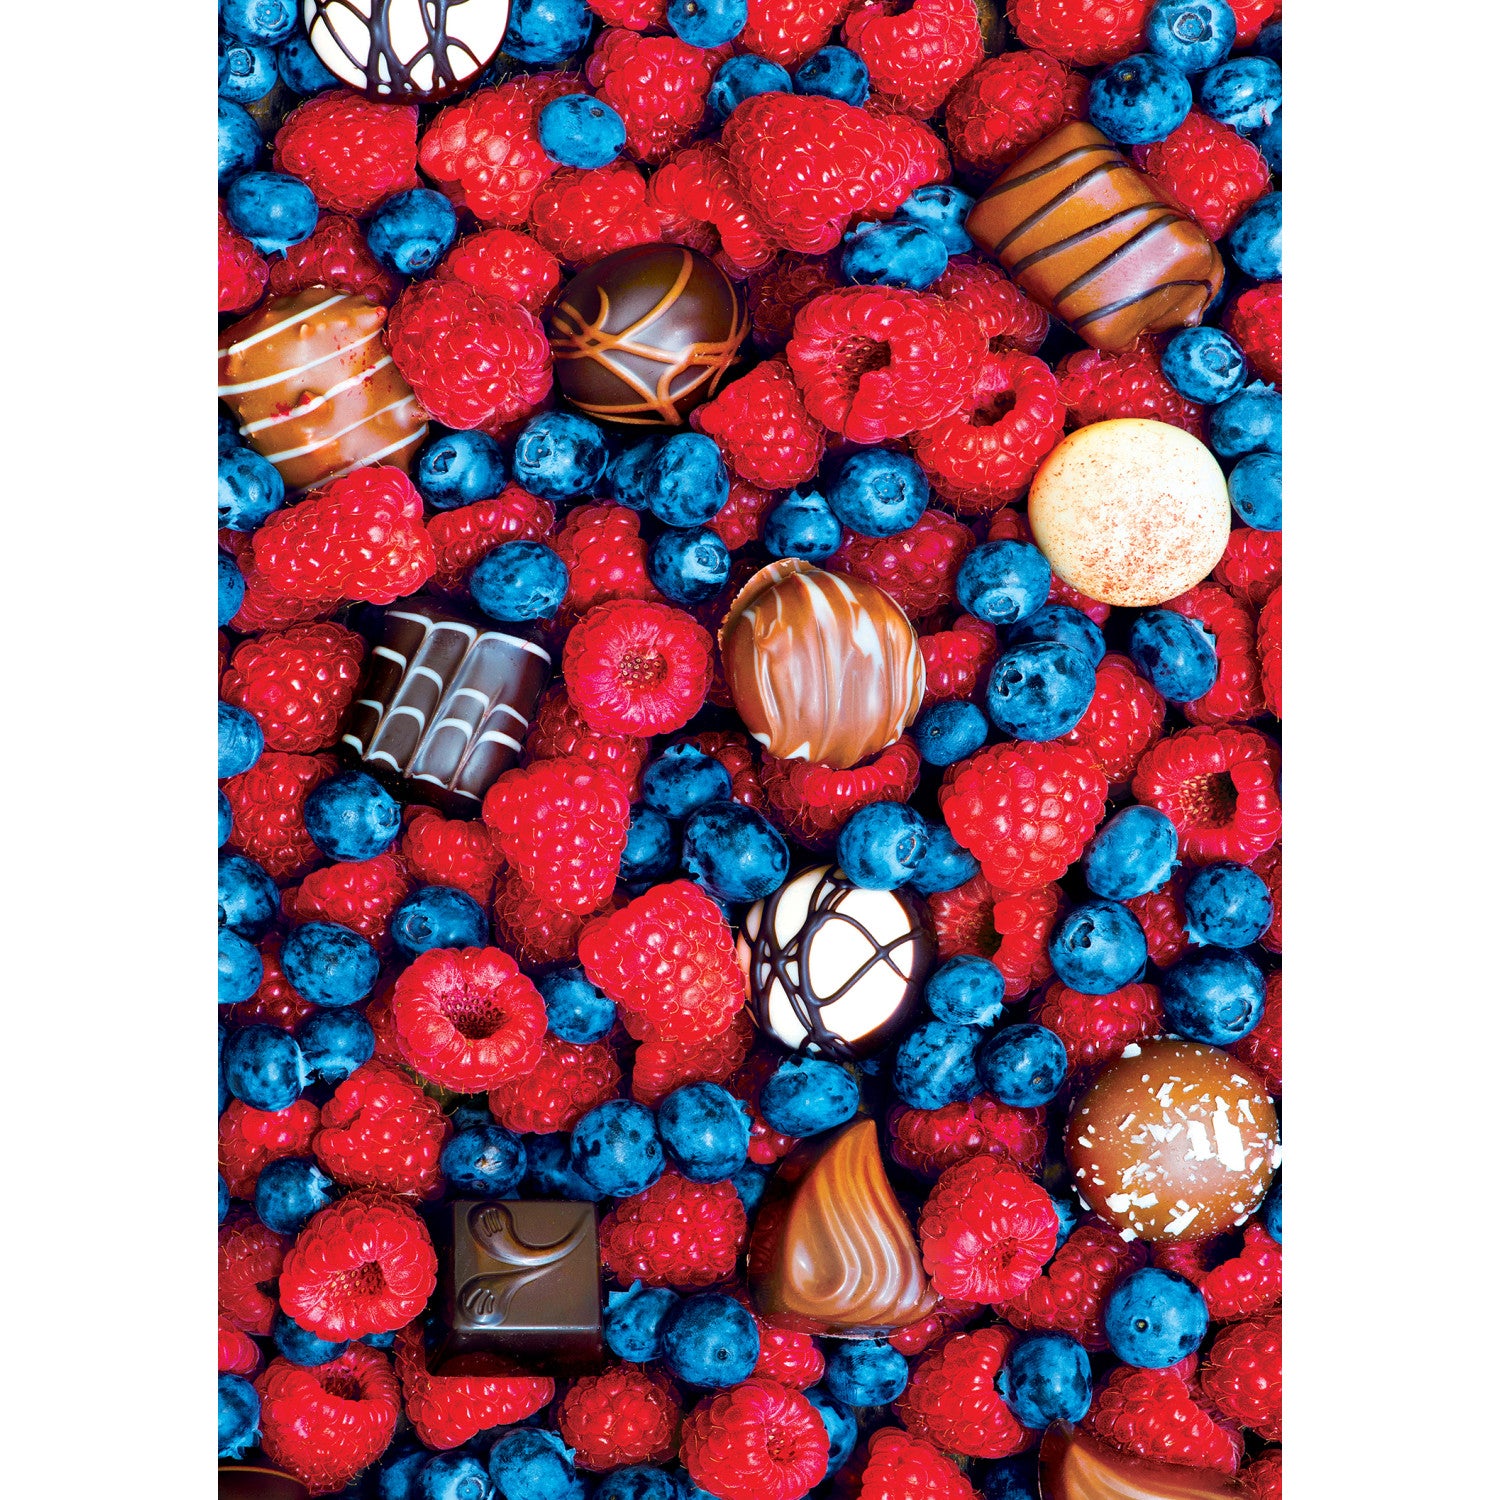 Worlds Smallest - Sweet Delights 1000 Piece Puzzle